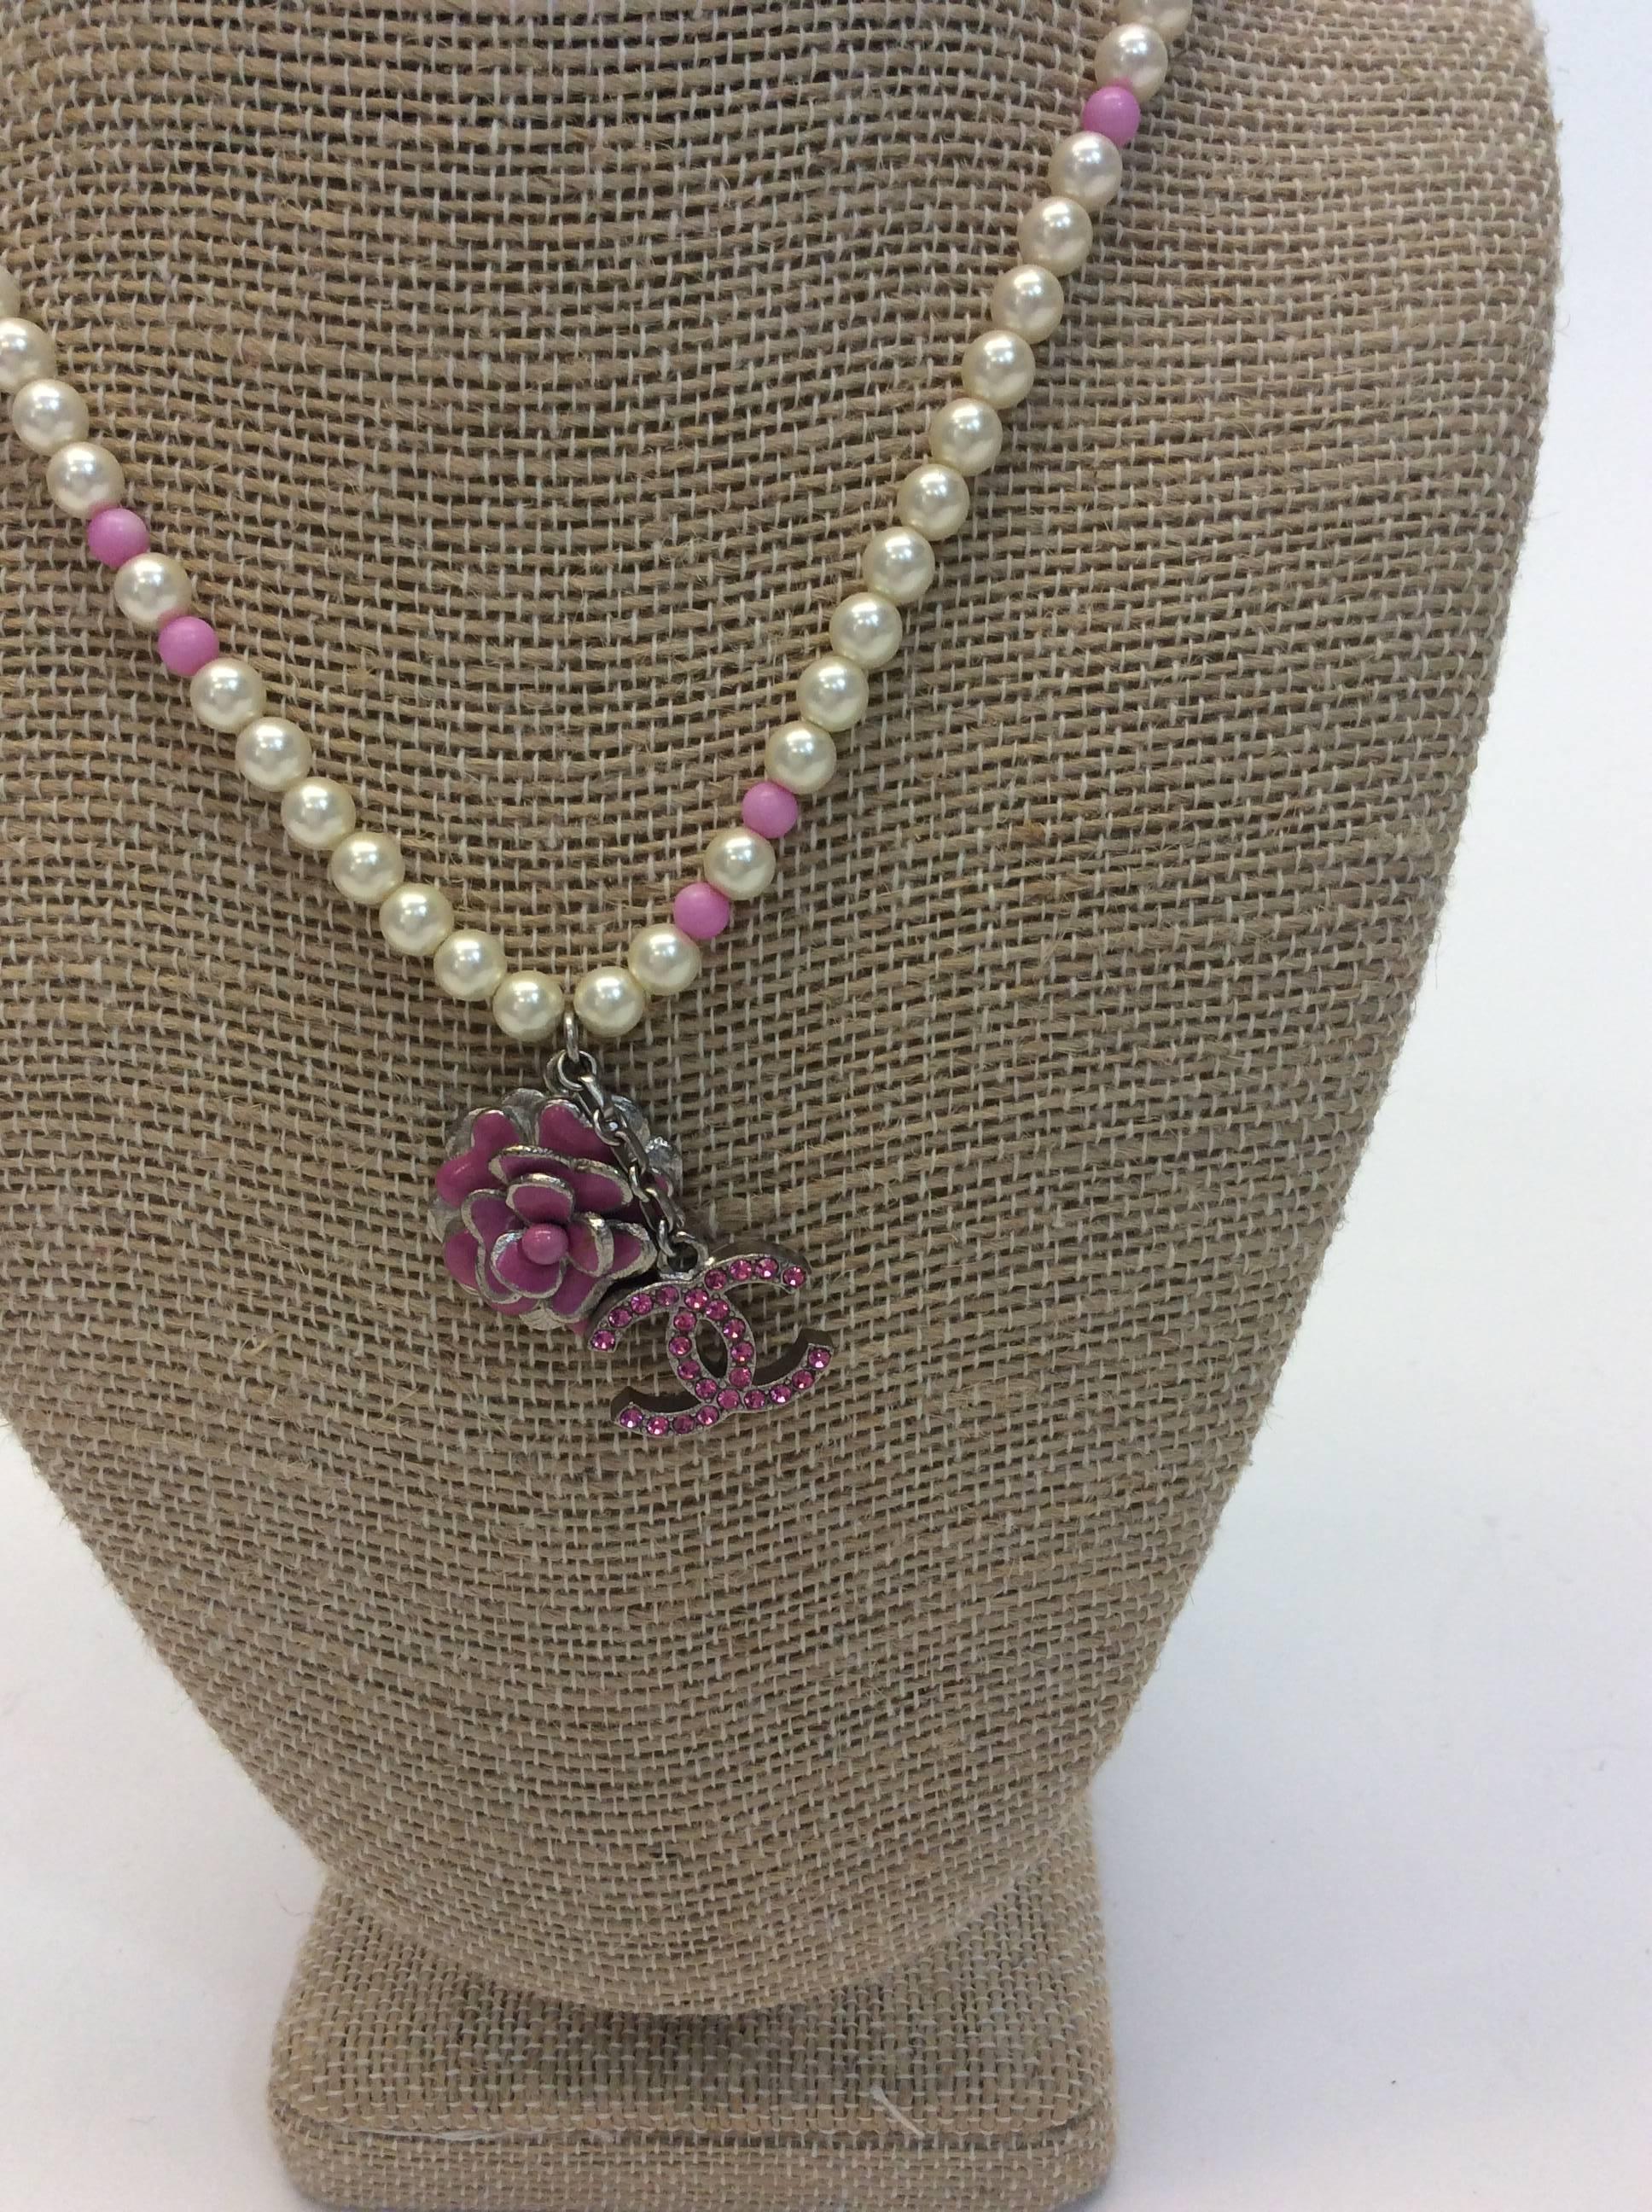 Chanel Pink Beaded Pearl Necklace With Charm
Chanel pink rhinestone logo
Floral charm in center
Pearl and pink beaded around
$299
Made in france
8 inch drop, 16 inches around